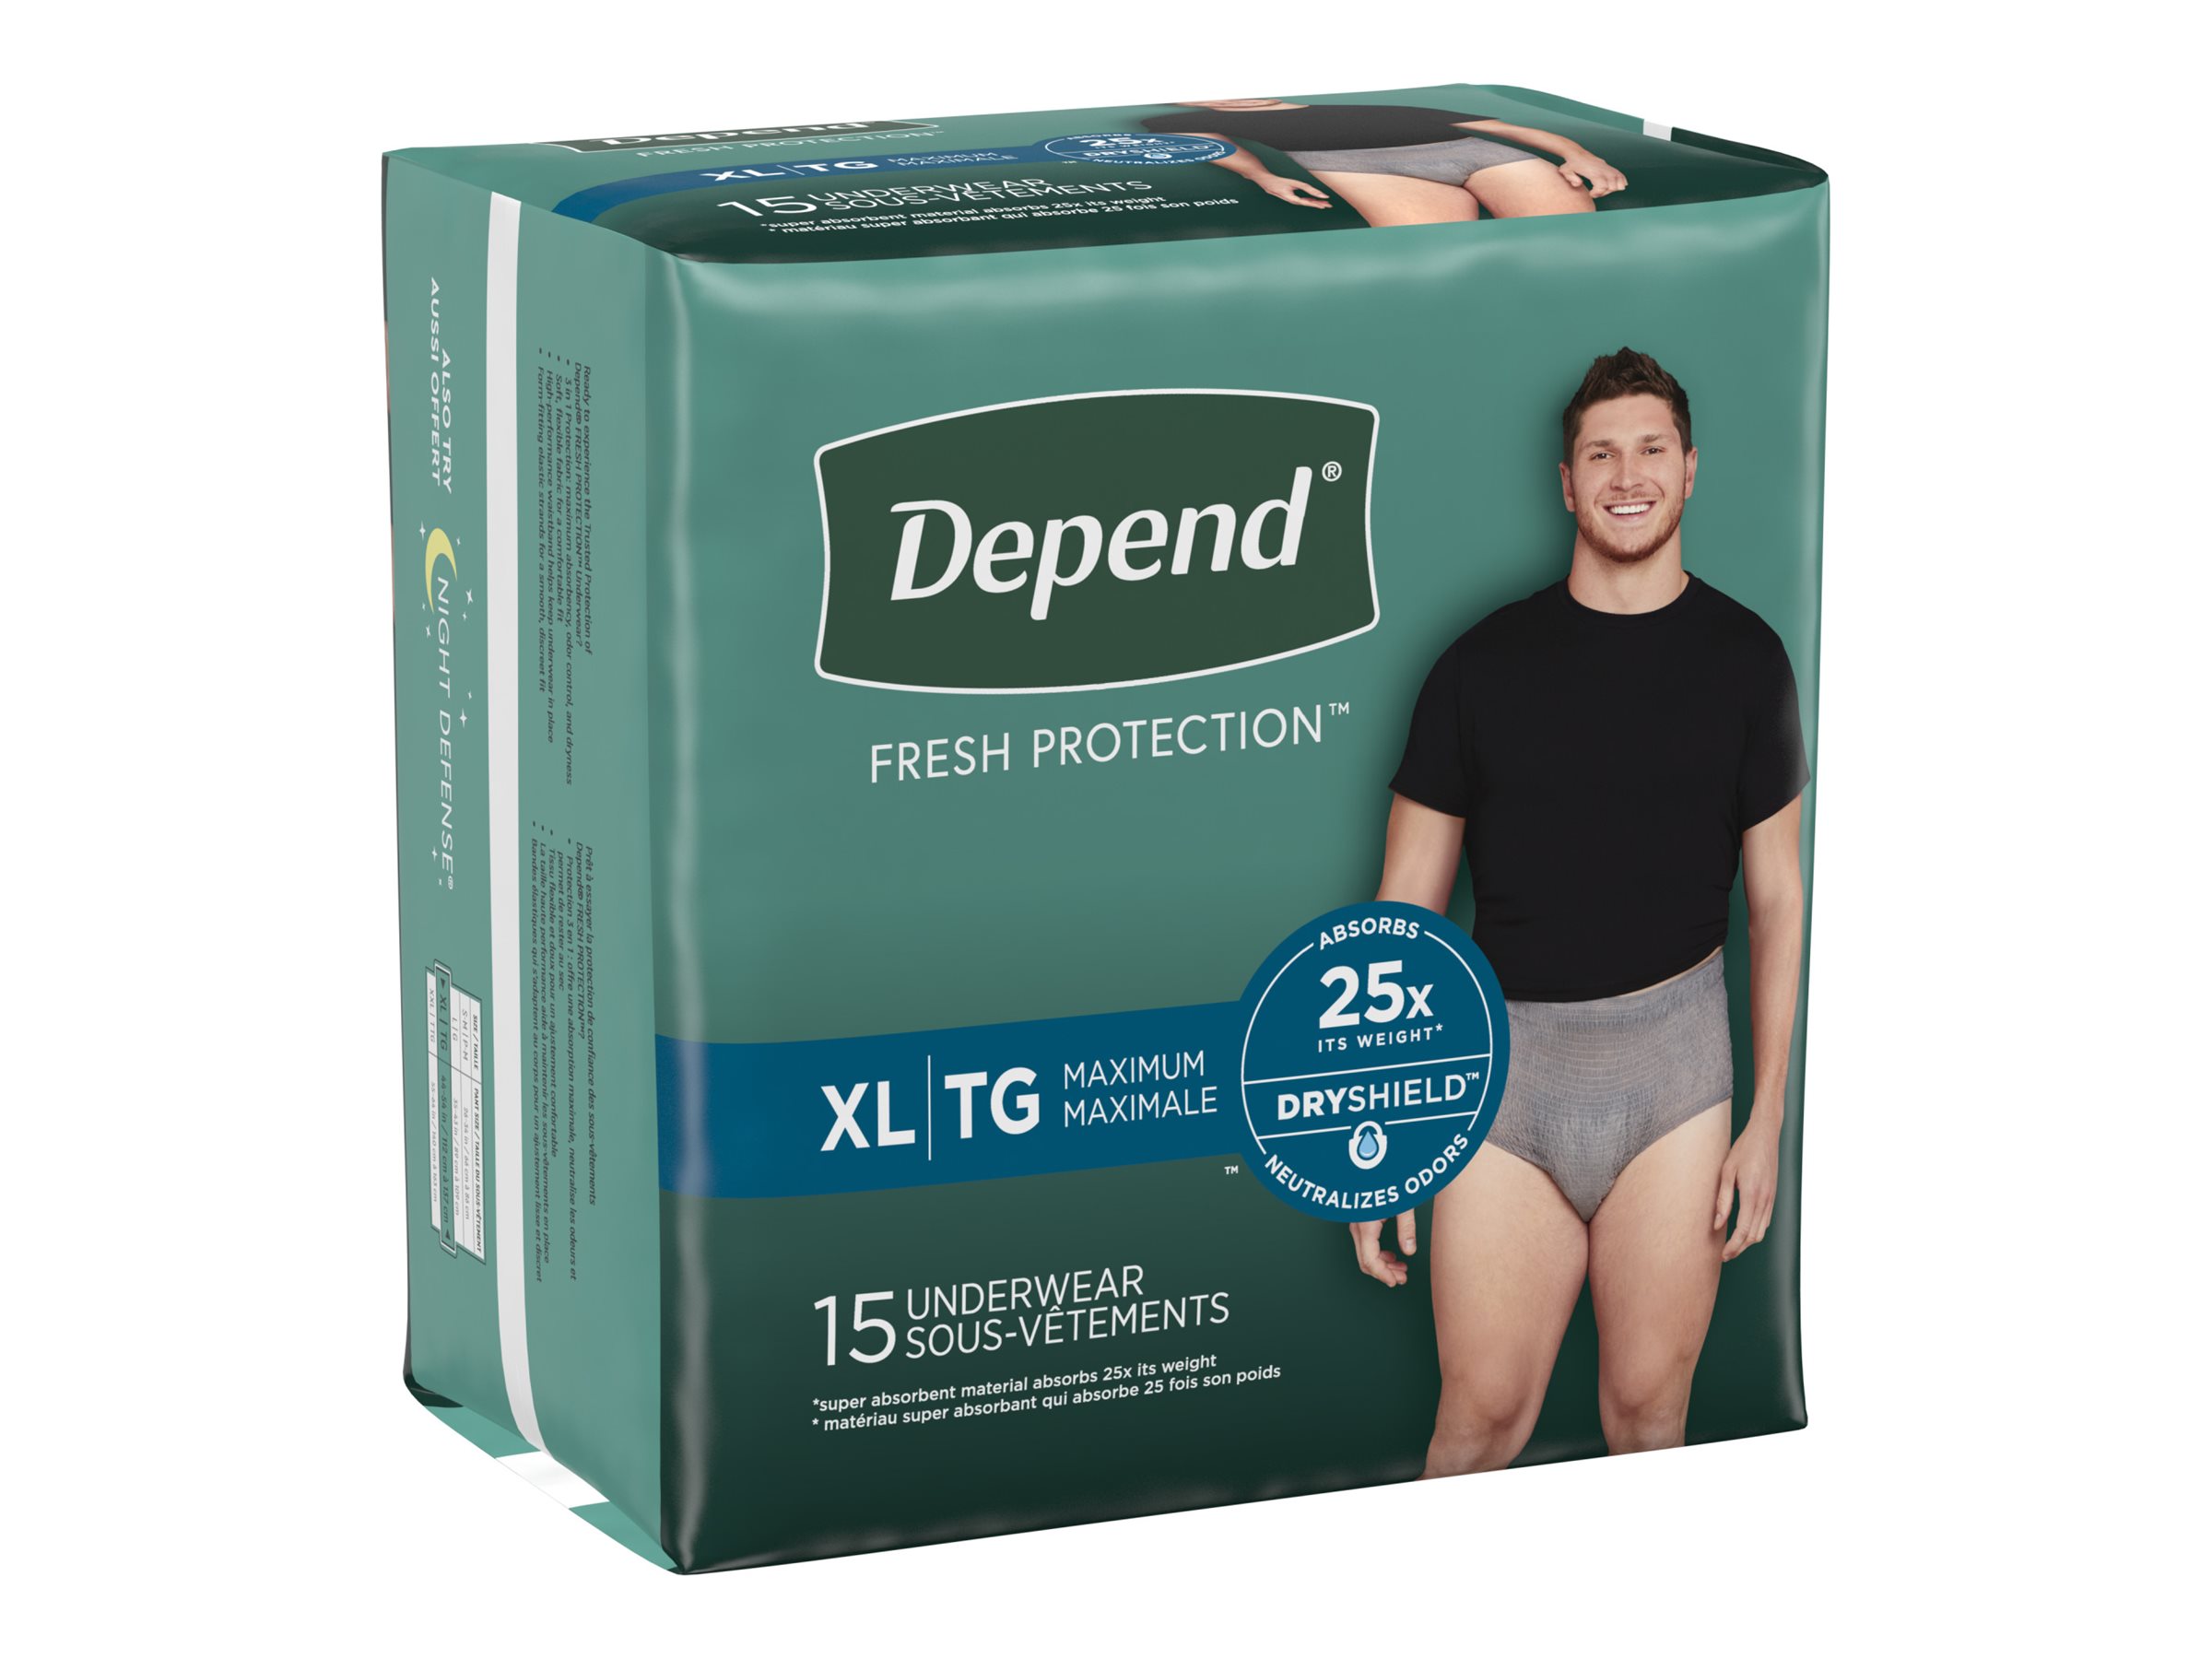 Keep Control with TENA's incontinence underwear made for men